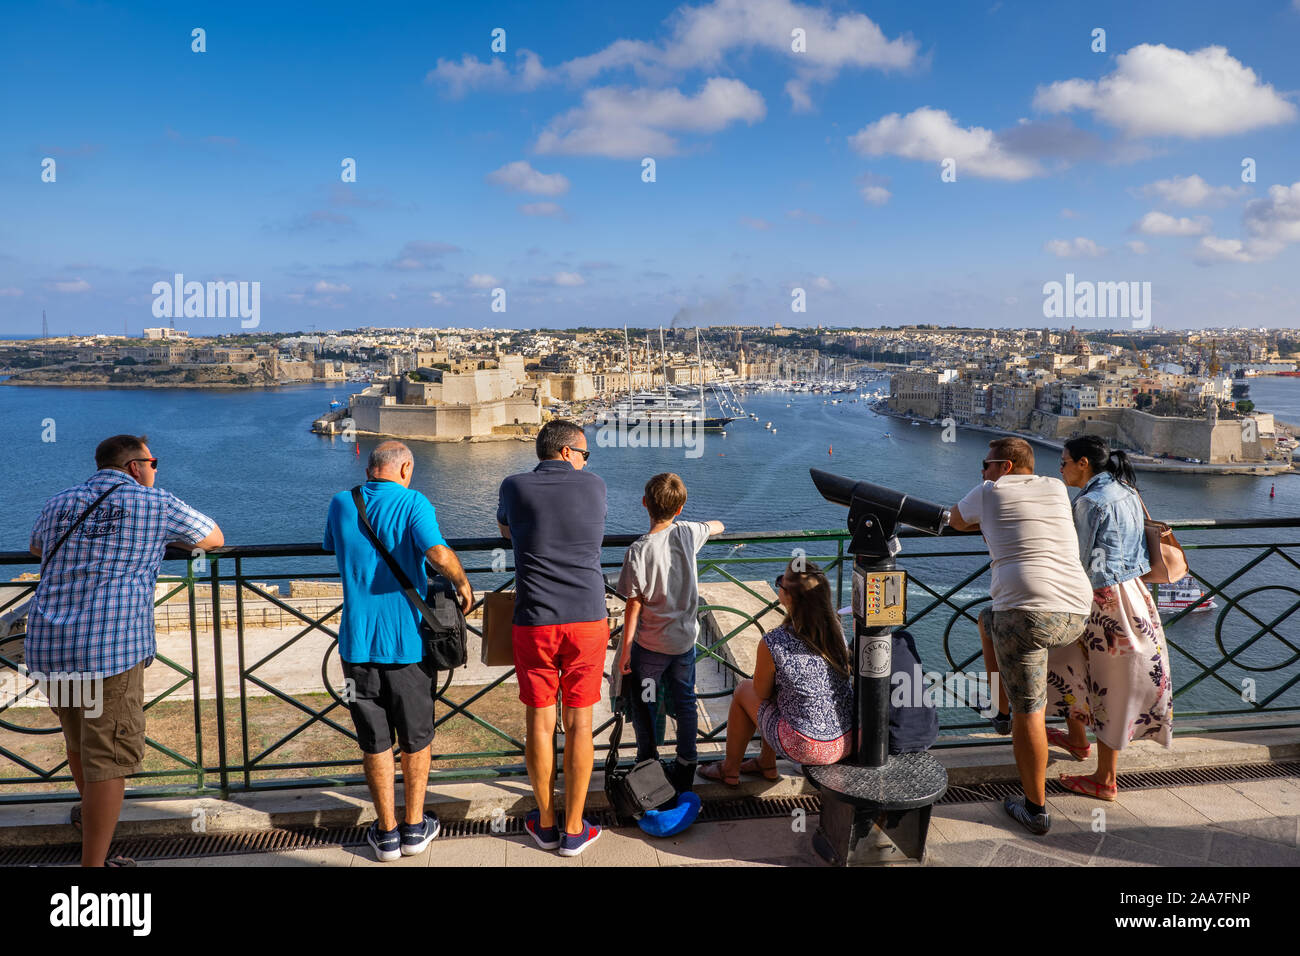 Valletta, Malta - October 13, 2019: Group of tourists enjoying the view of the Three Cities and Grand Harbour from Upper Barrakka Gardens viewpoint in Stock Photo